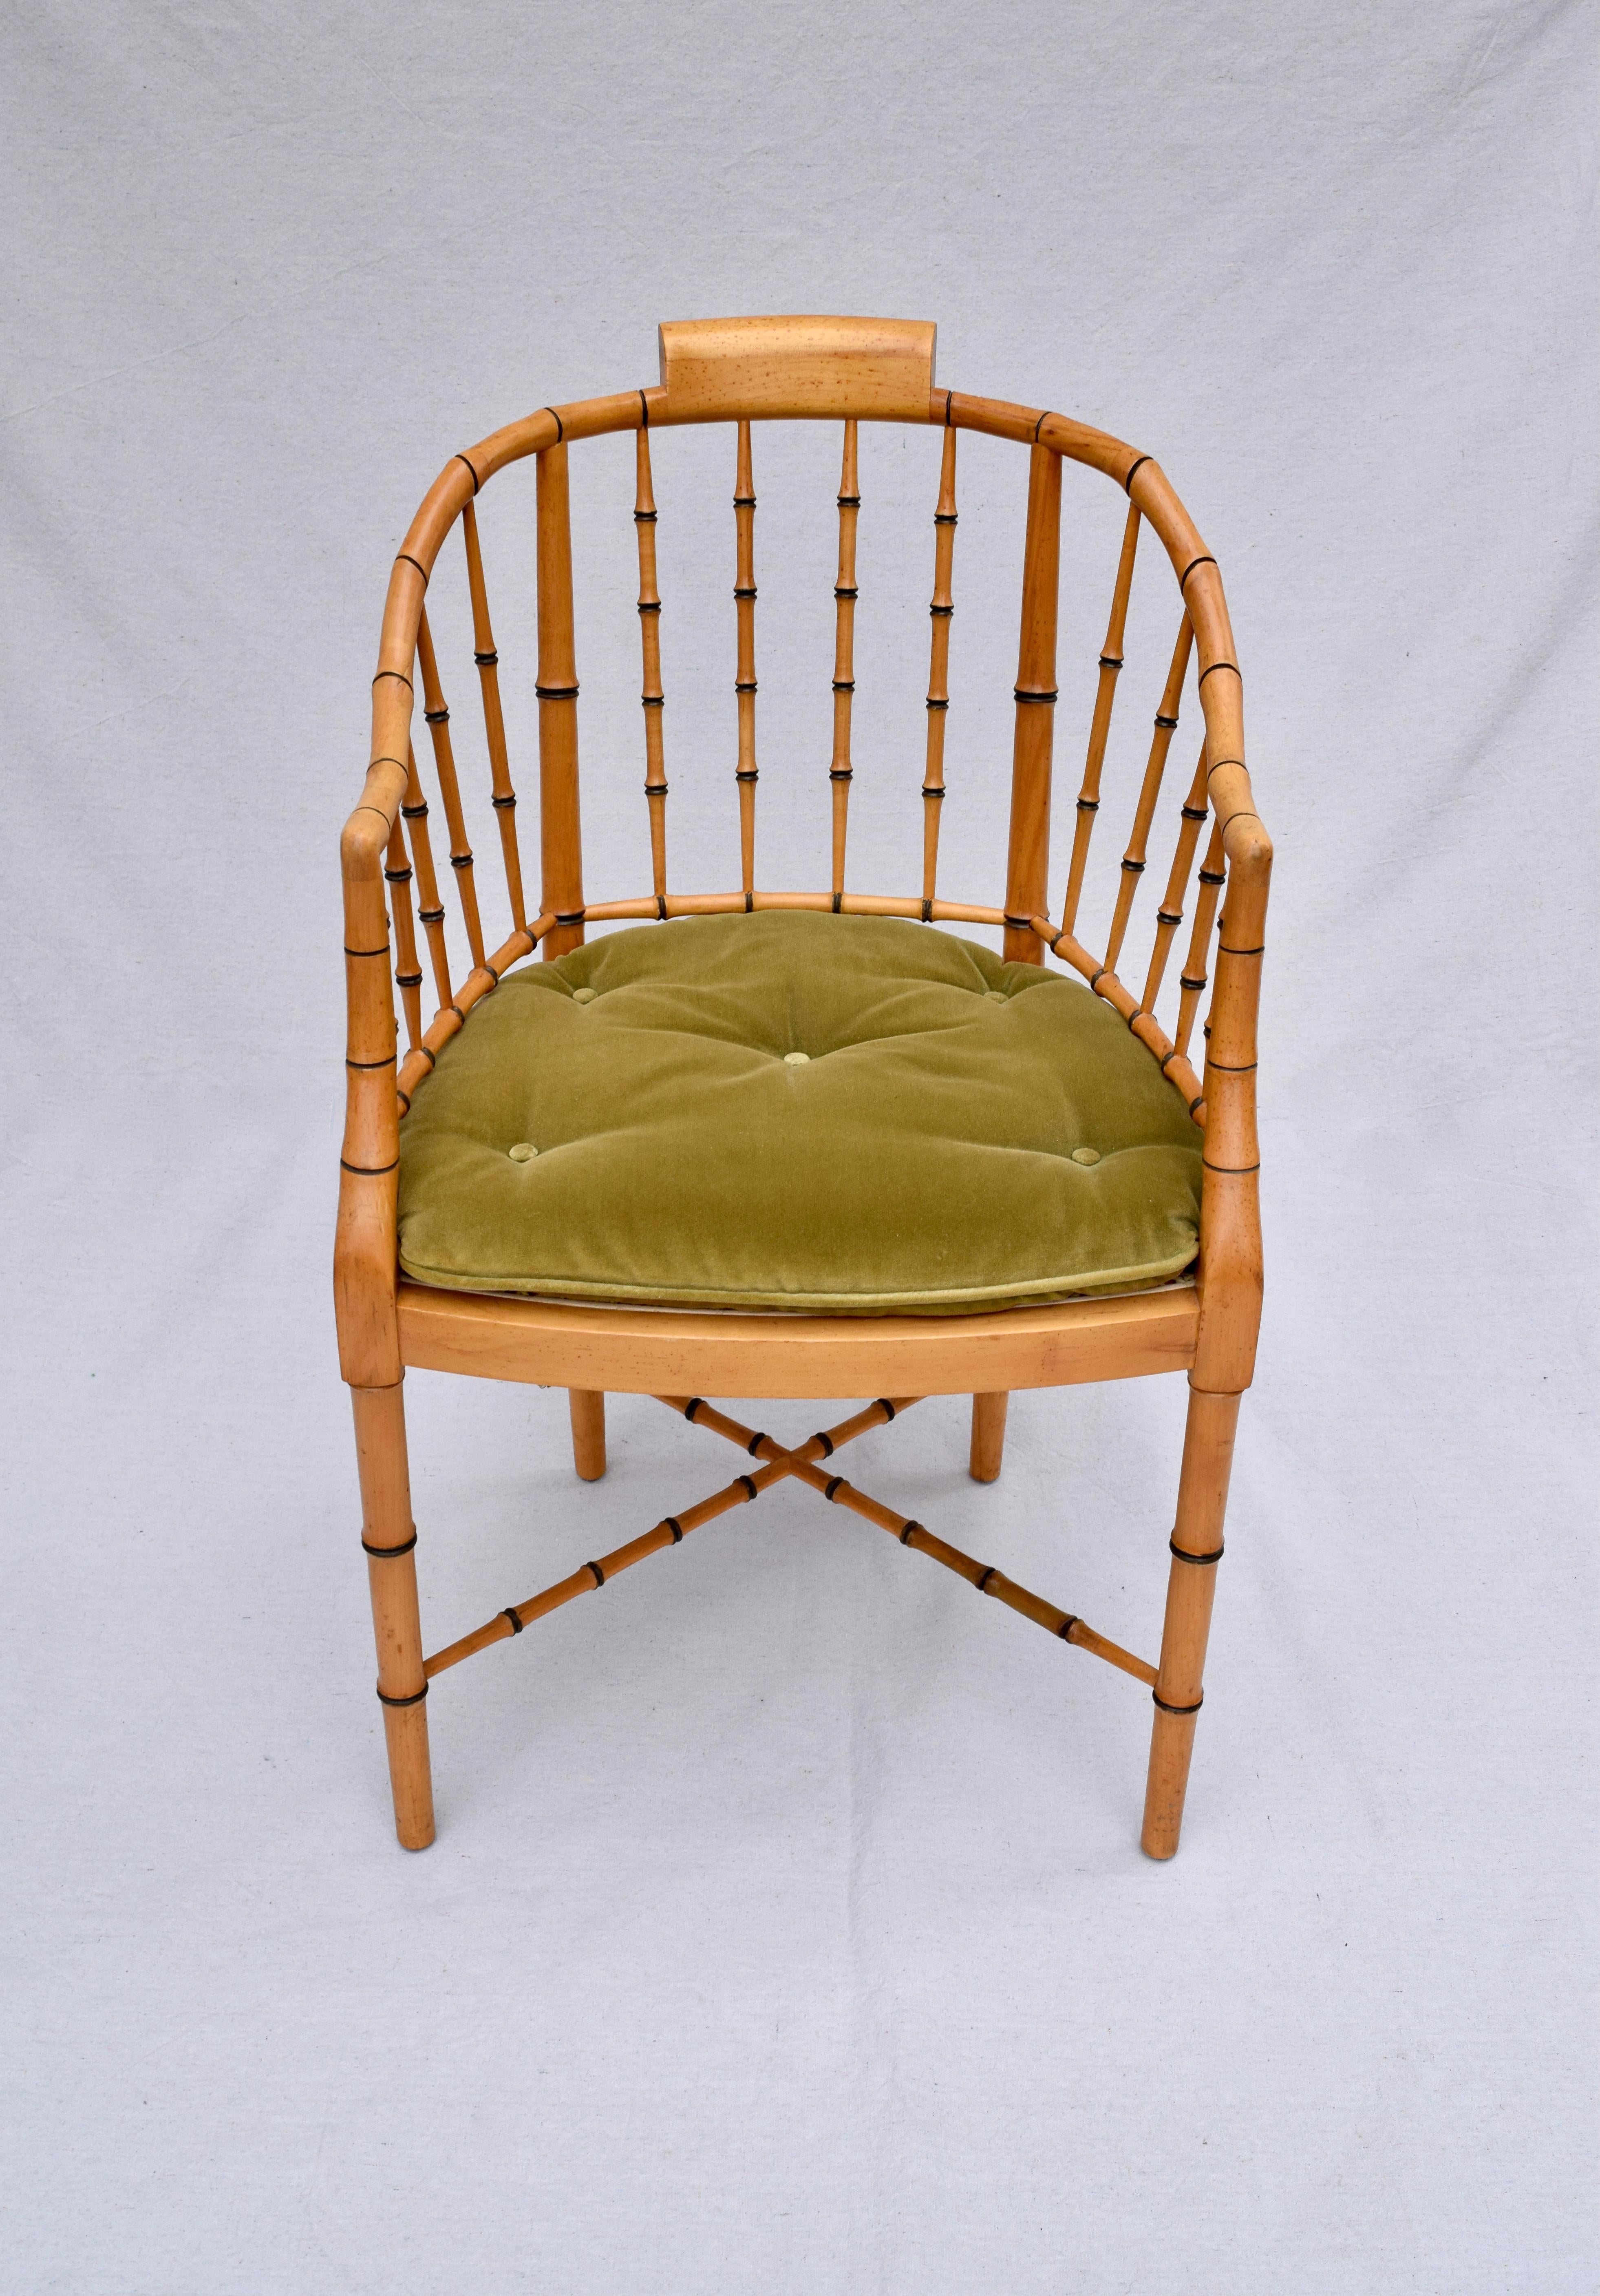 Faux bamboo Regency armchair with new caned seat by Baker Furniture USA, 1960s. Includes custom tufted green velvet cushion with tassel ties. Excellent vintage condition. Seat height 20